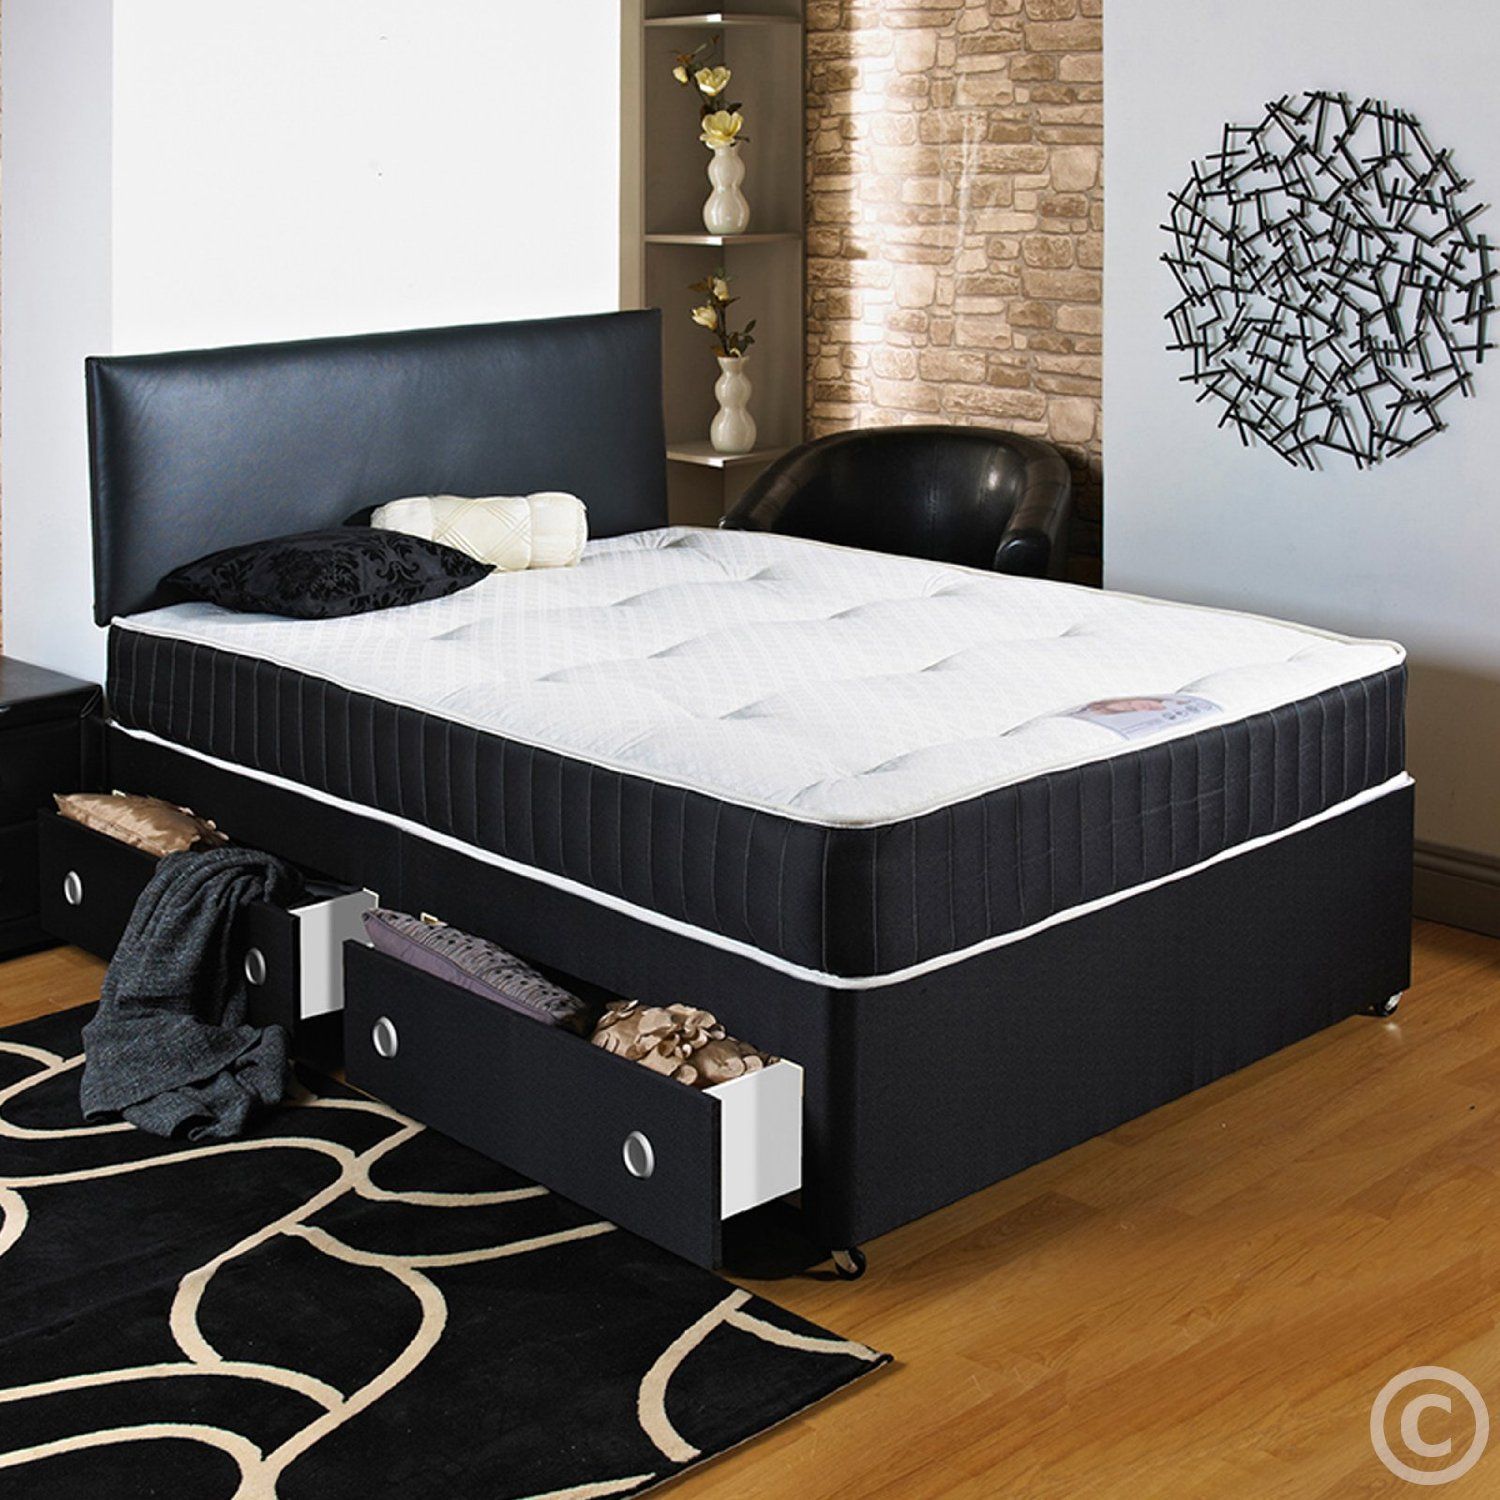 2ft6 3ft Single Divan Bed With 22cm Mattress.3 Colours.Storage.Drawers.Headboard 